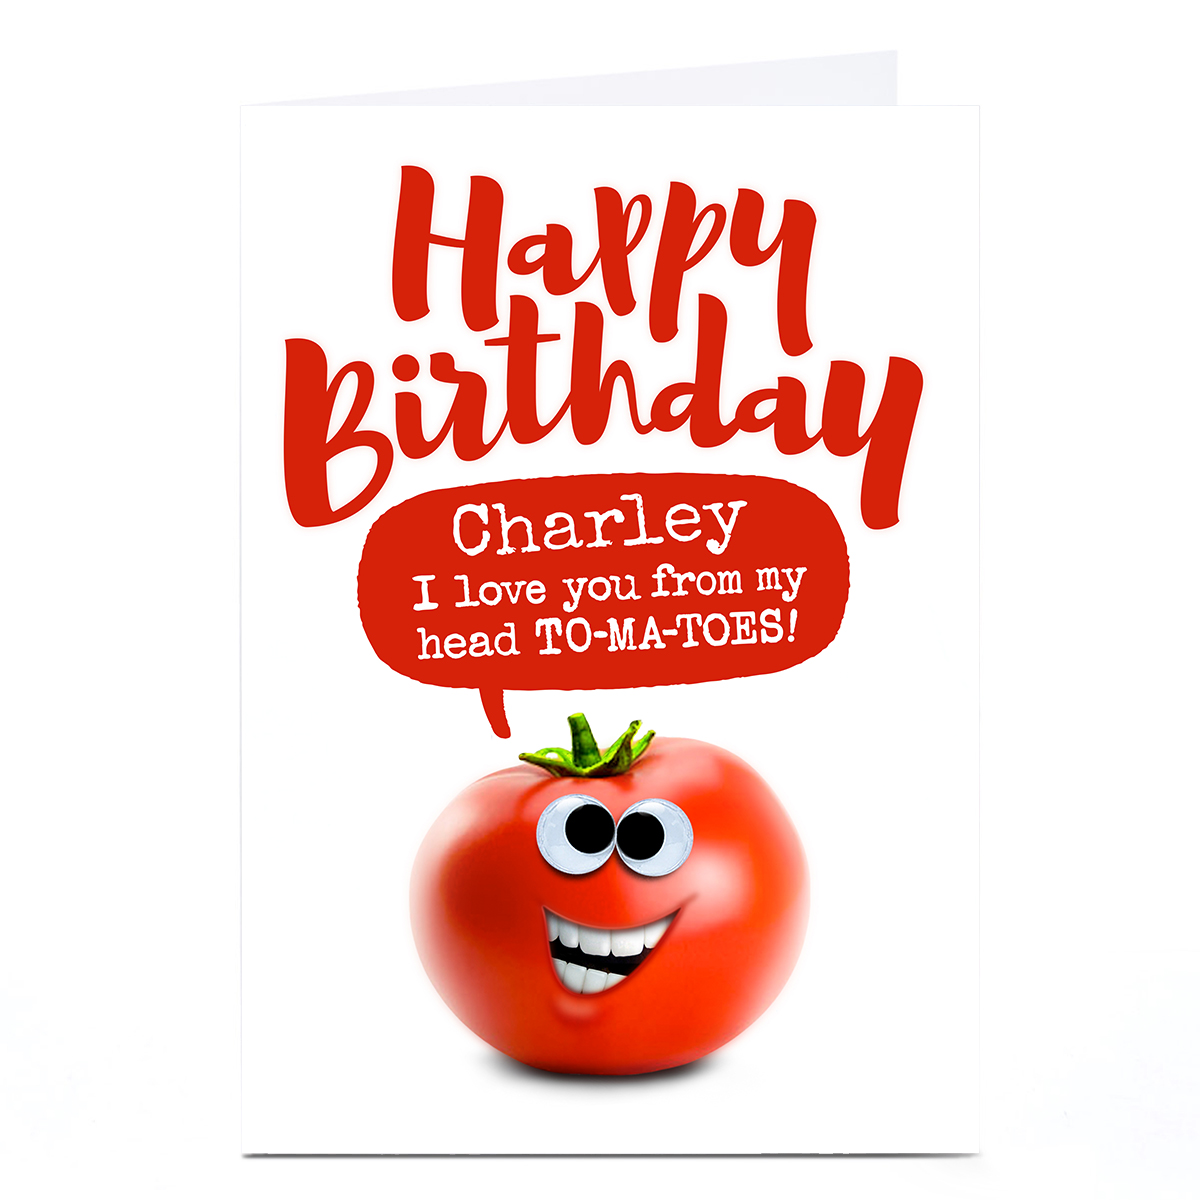 Personalised PG Quips Birthday Card - Head To-Ma-Toes